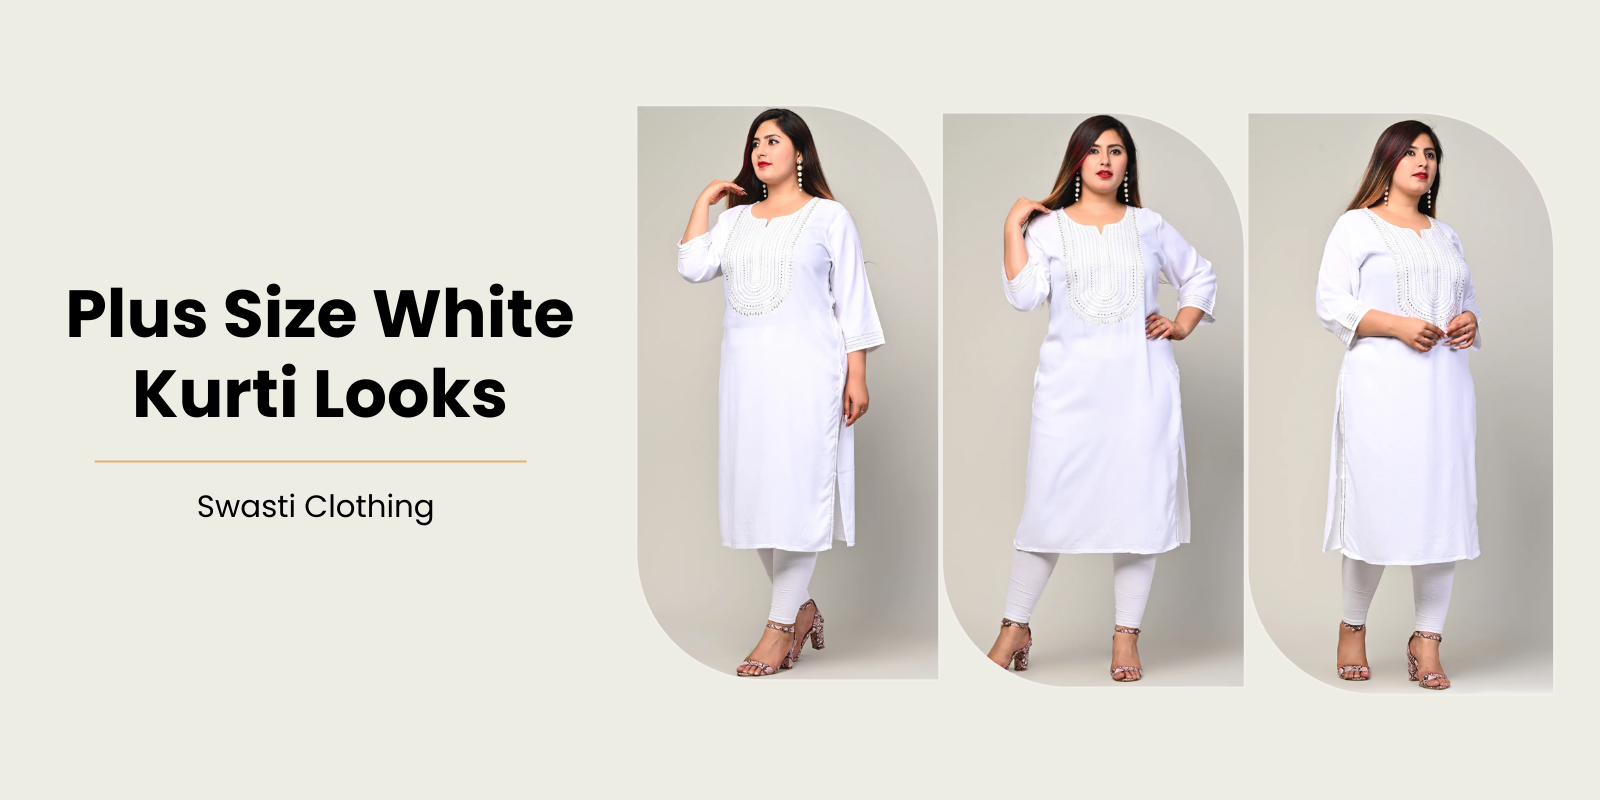 Must-Have Looks with a Plus Size White Kurti